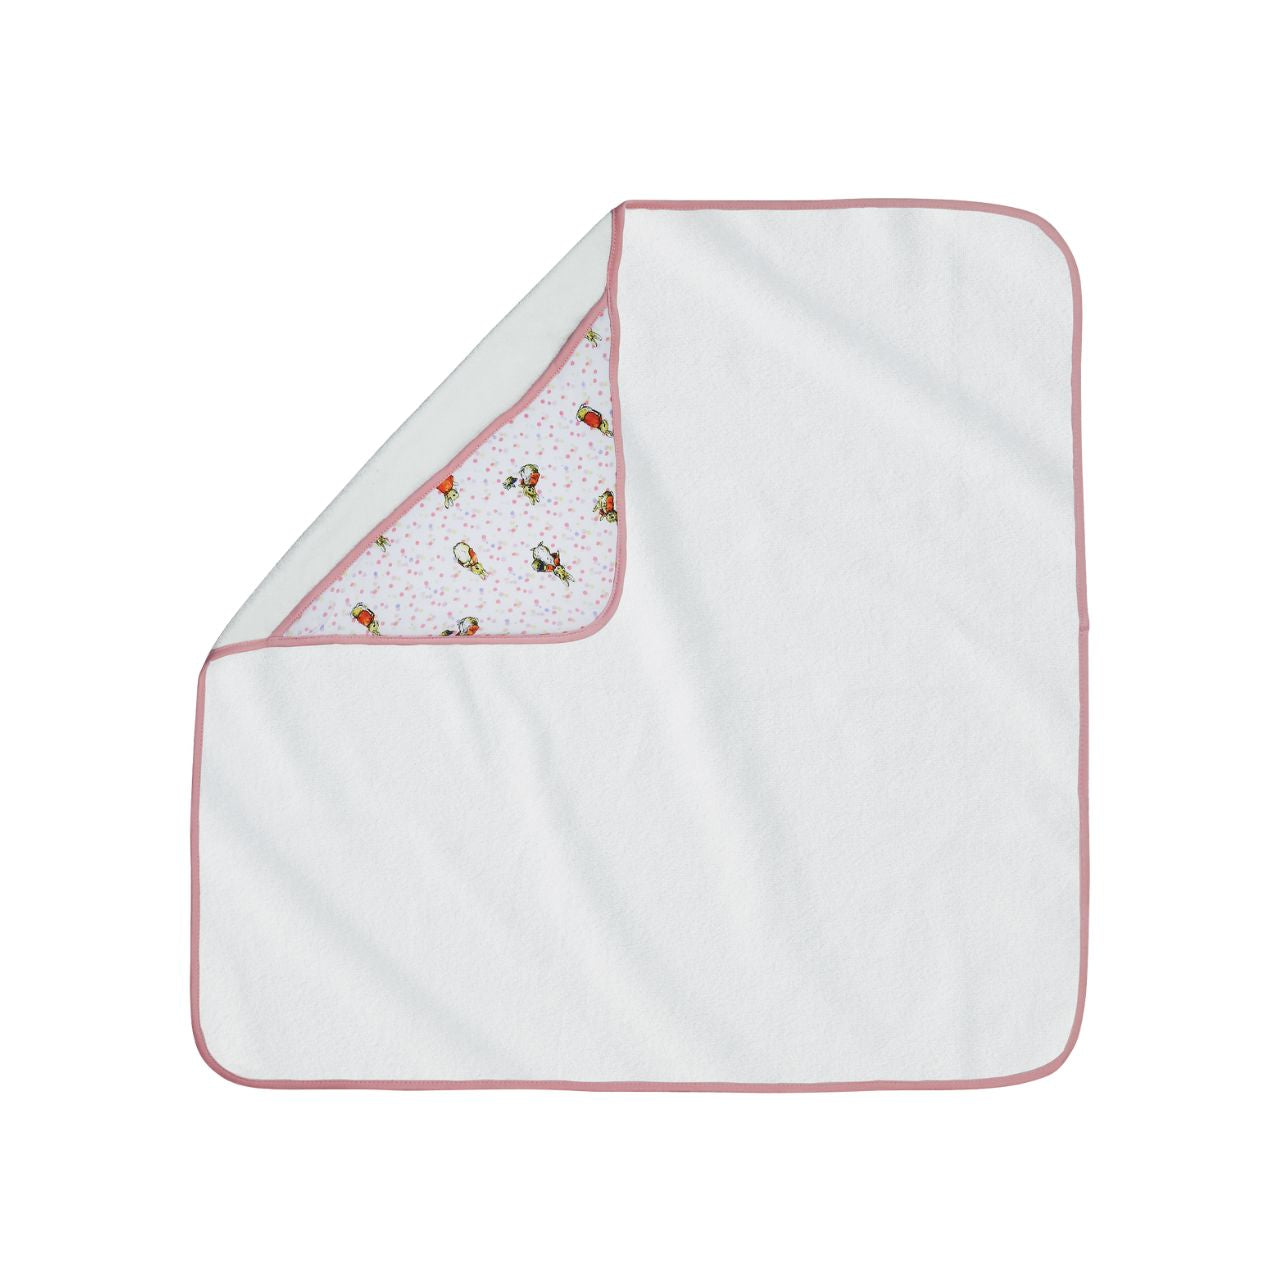 Beatrix Potter Flopsy Baby Collection Hooded Towel  This Flopsy hooded bath towel is perfect for keeping your little one wrapped up warm and snug after bath-time. Made from an ultra-soft and cosy bamboo cotton, terry fabric (70% cotton and 30% bamboo) and Flopsy artwork on the hood.